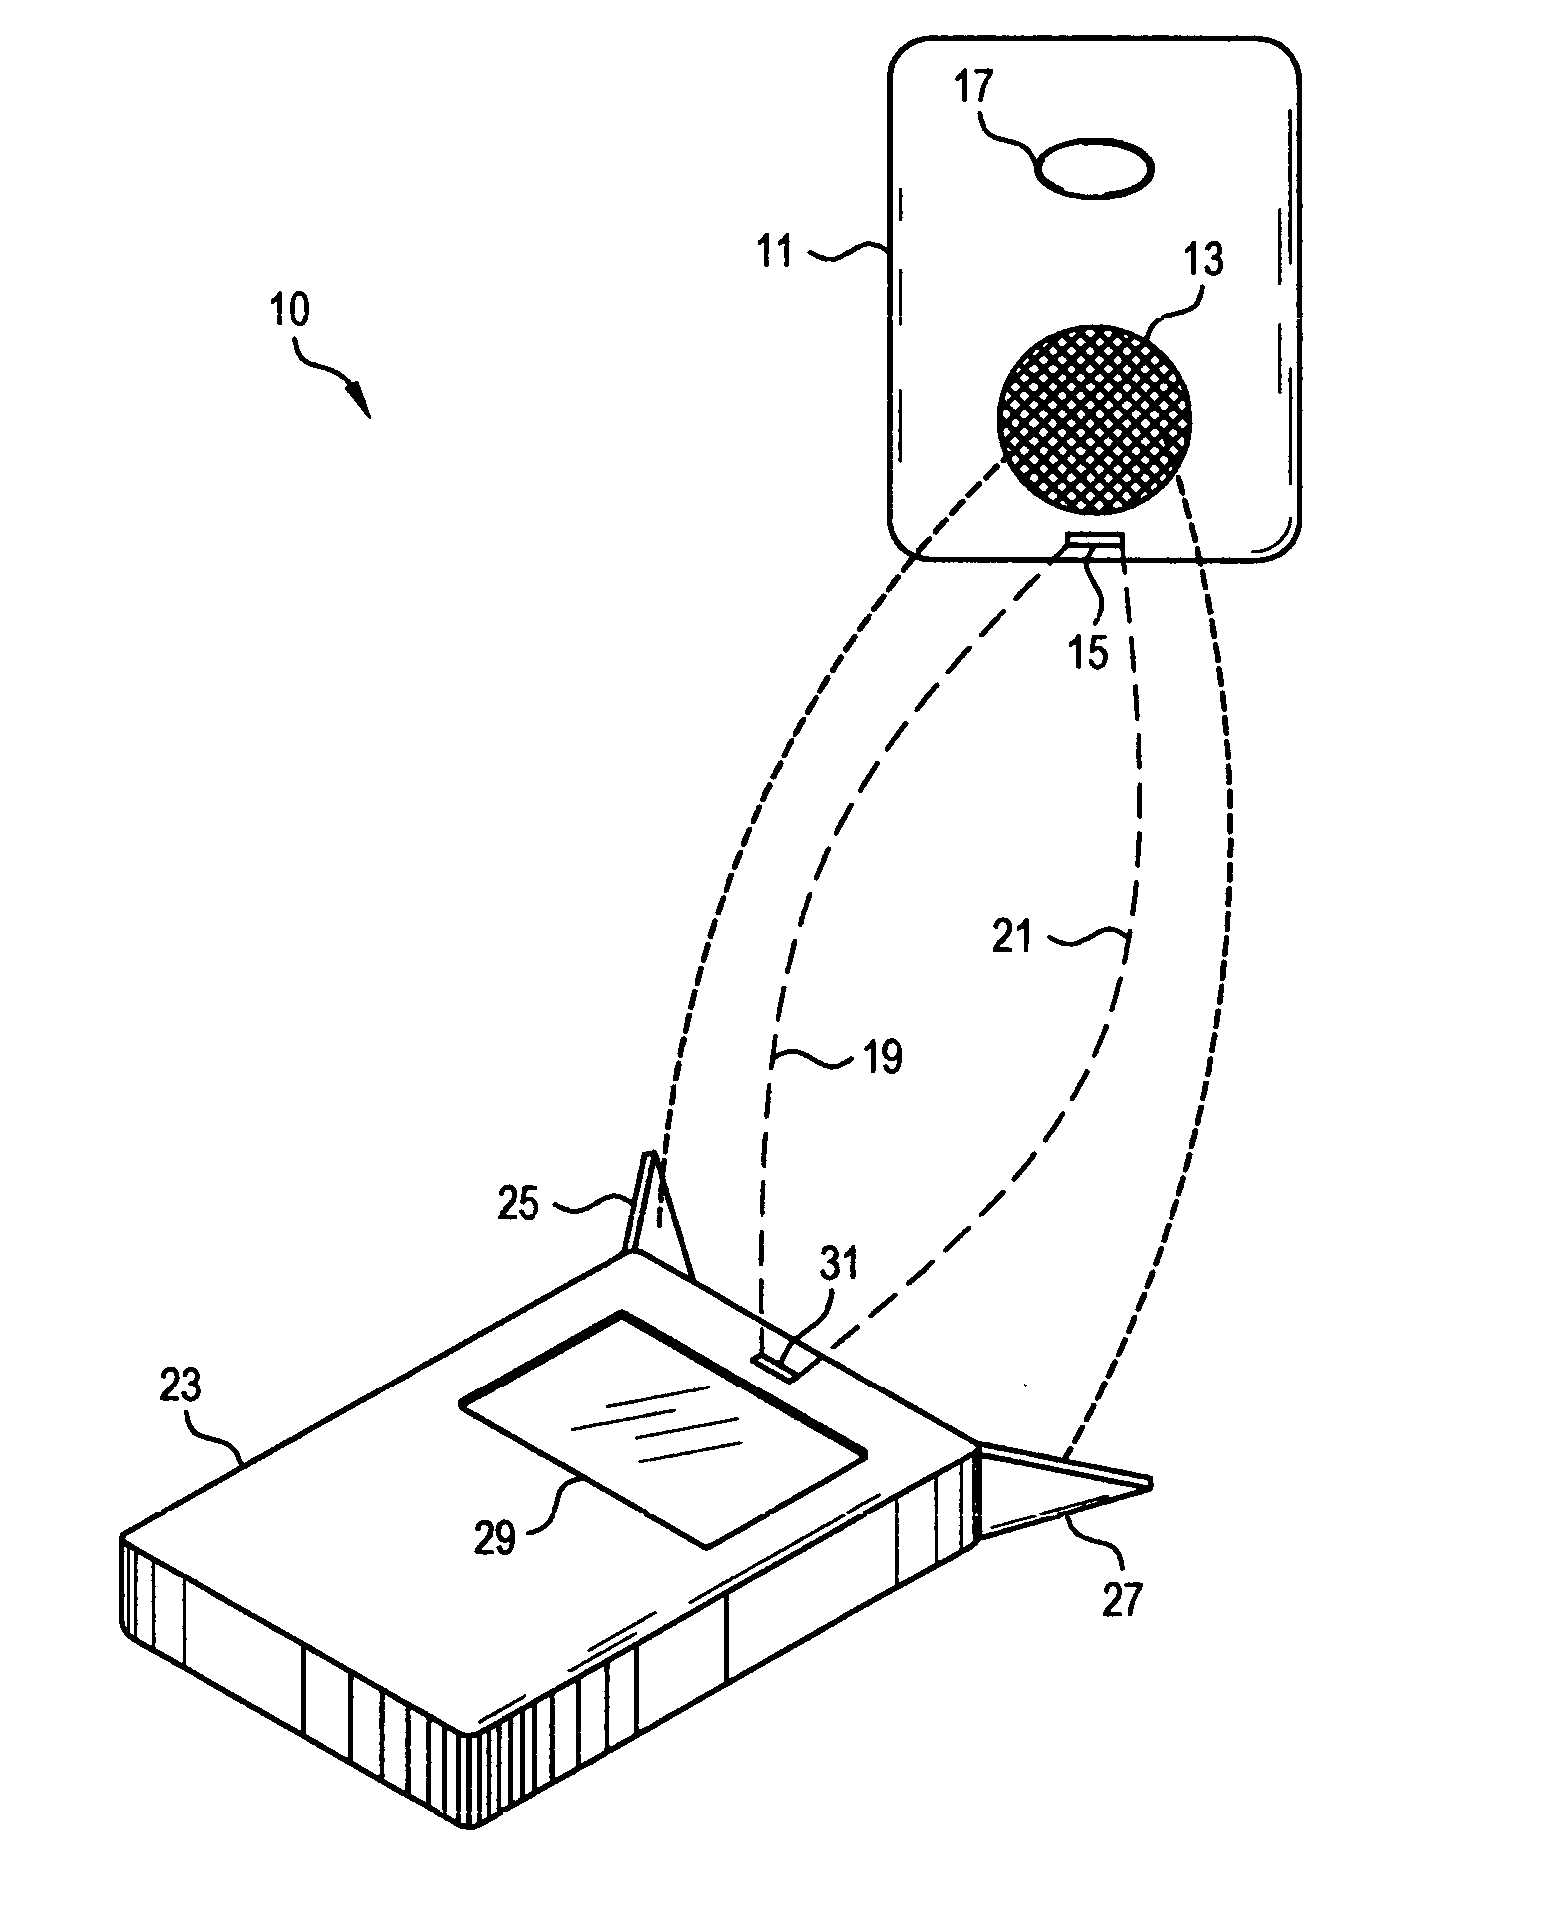 RF/acoustic person locator system